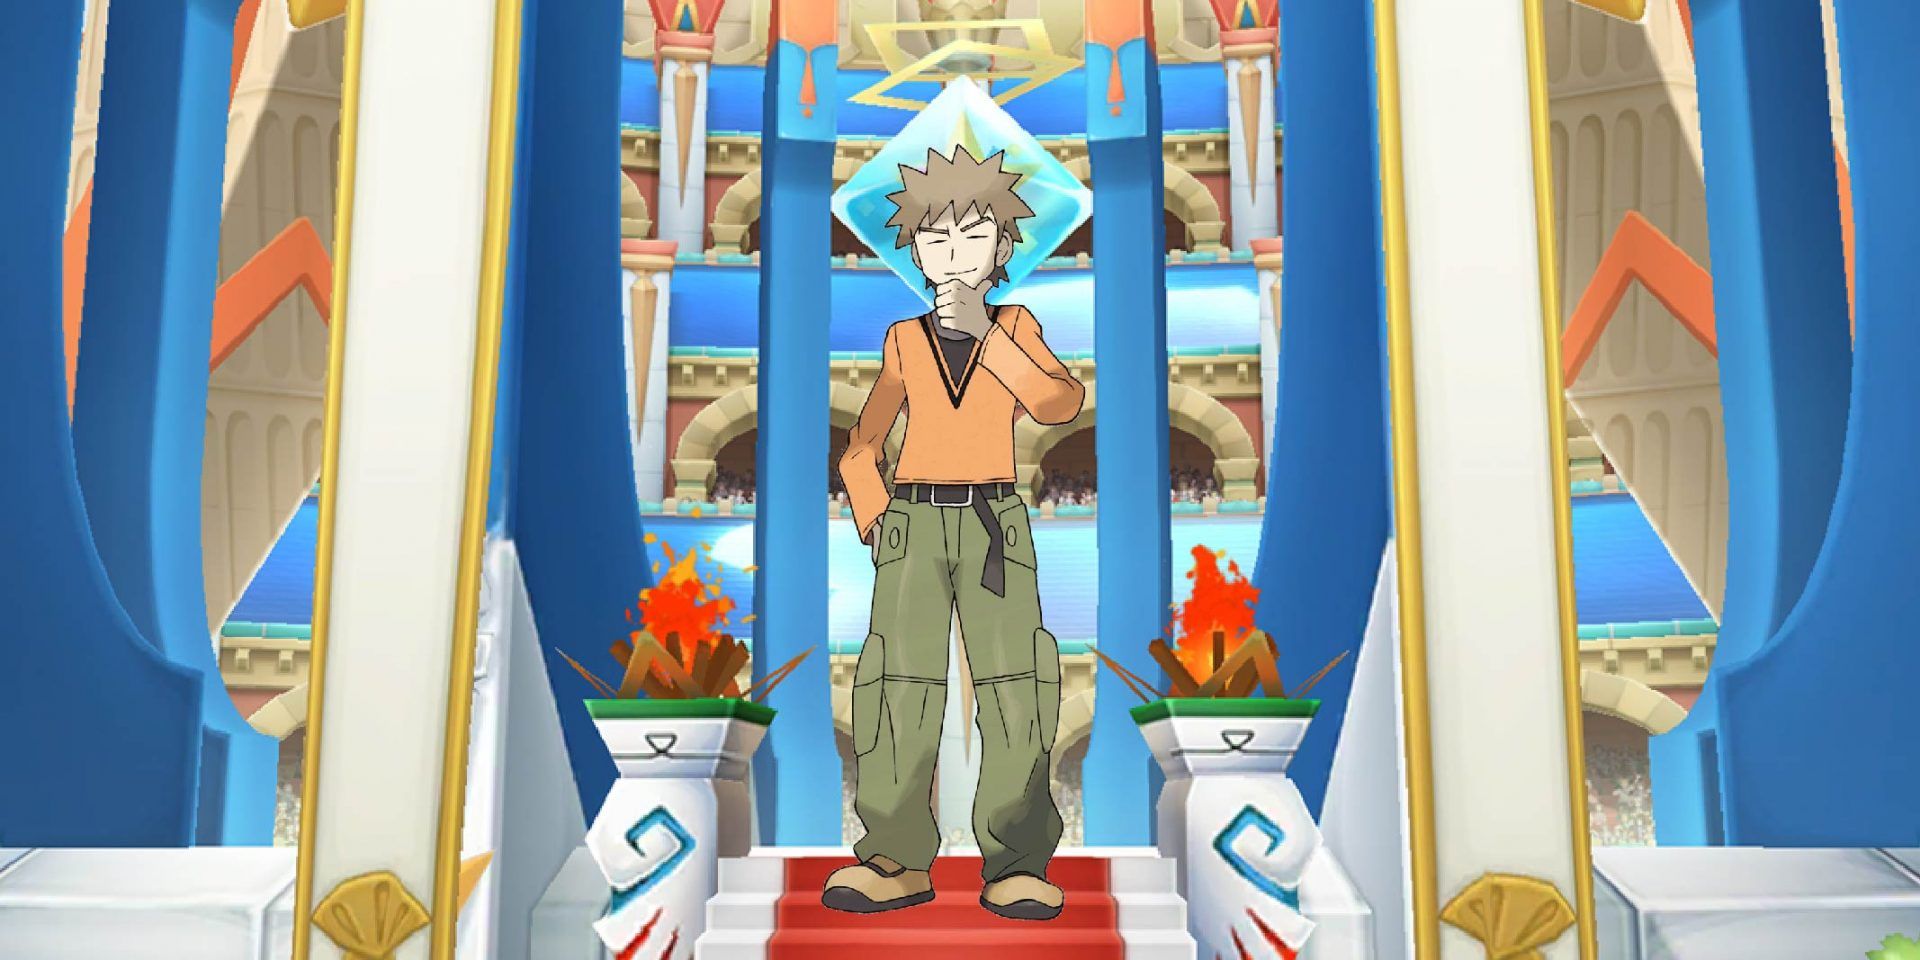 Brock from Pokémon standing against an arena backdrop.